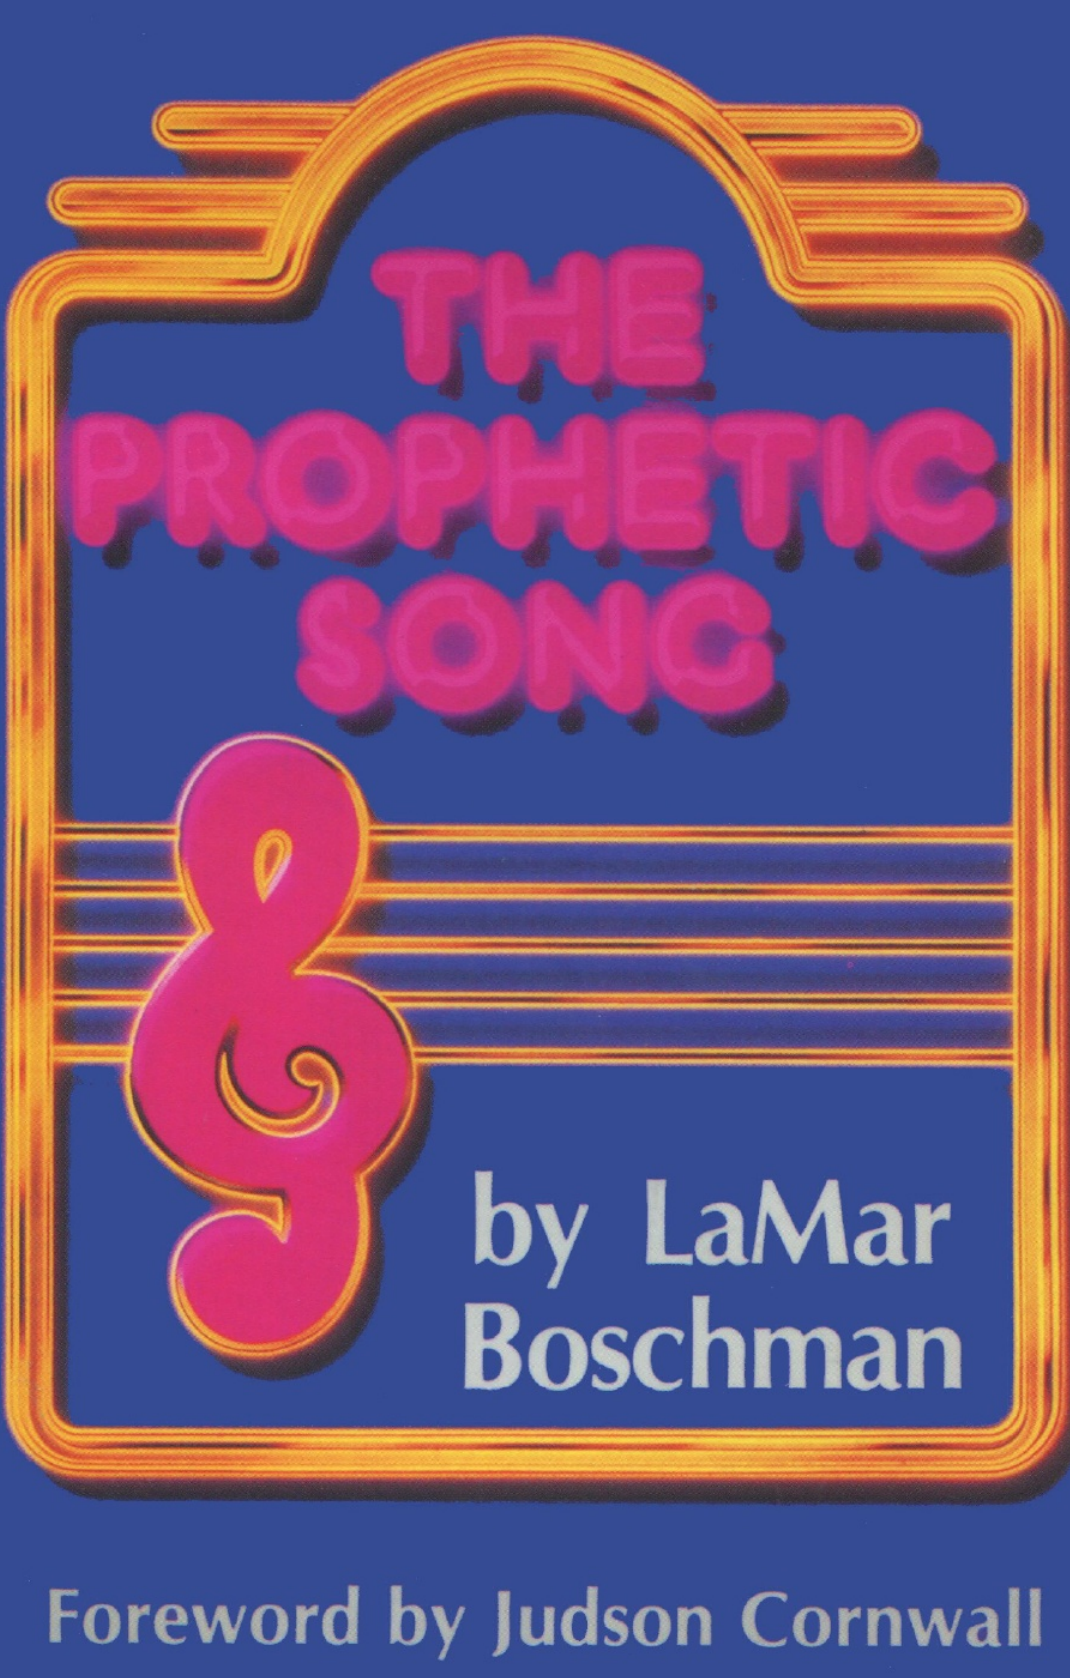 Cover of The Prophetic Song